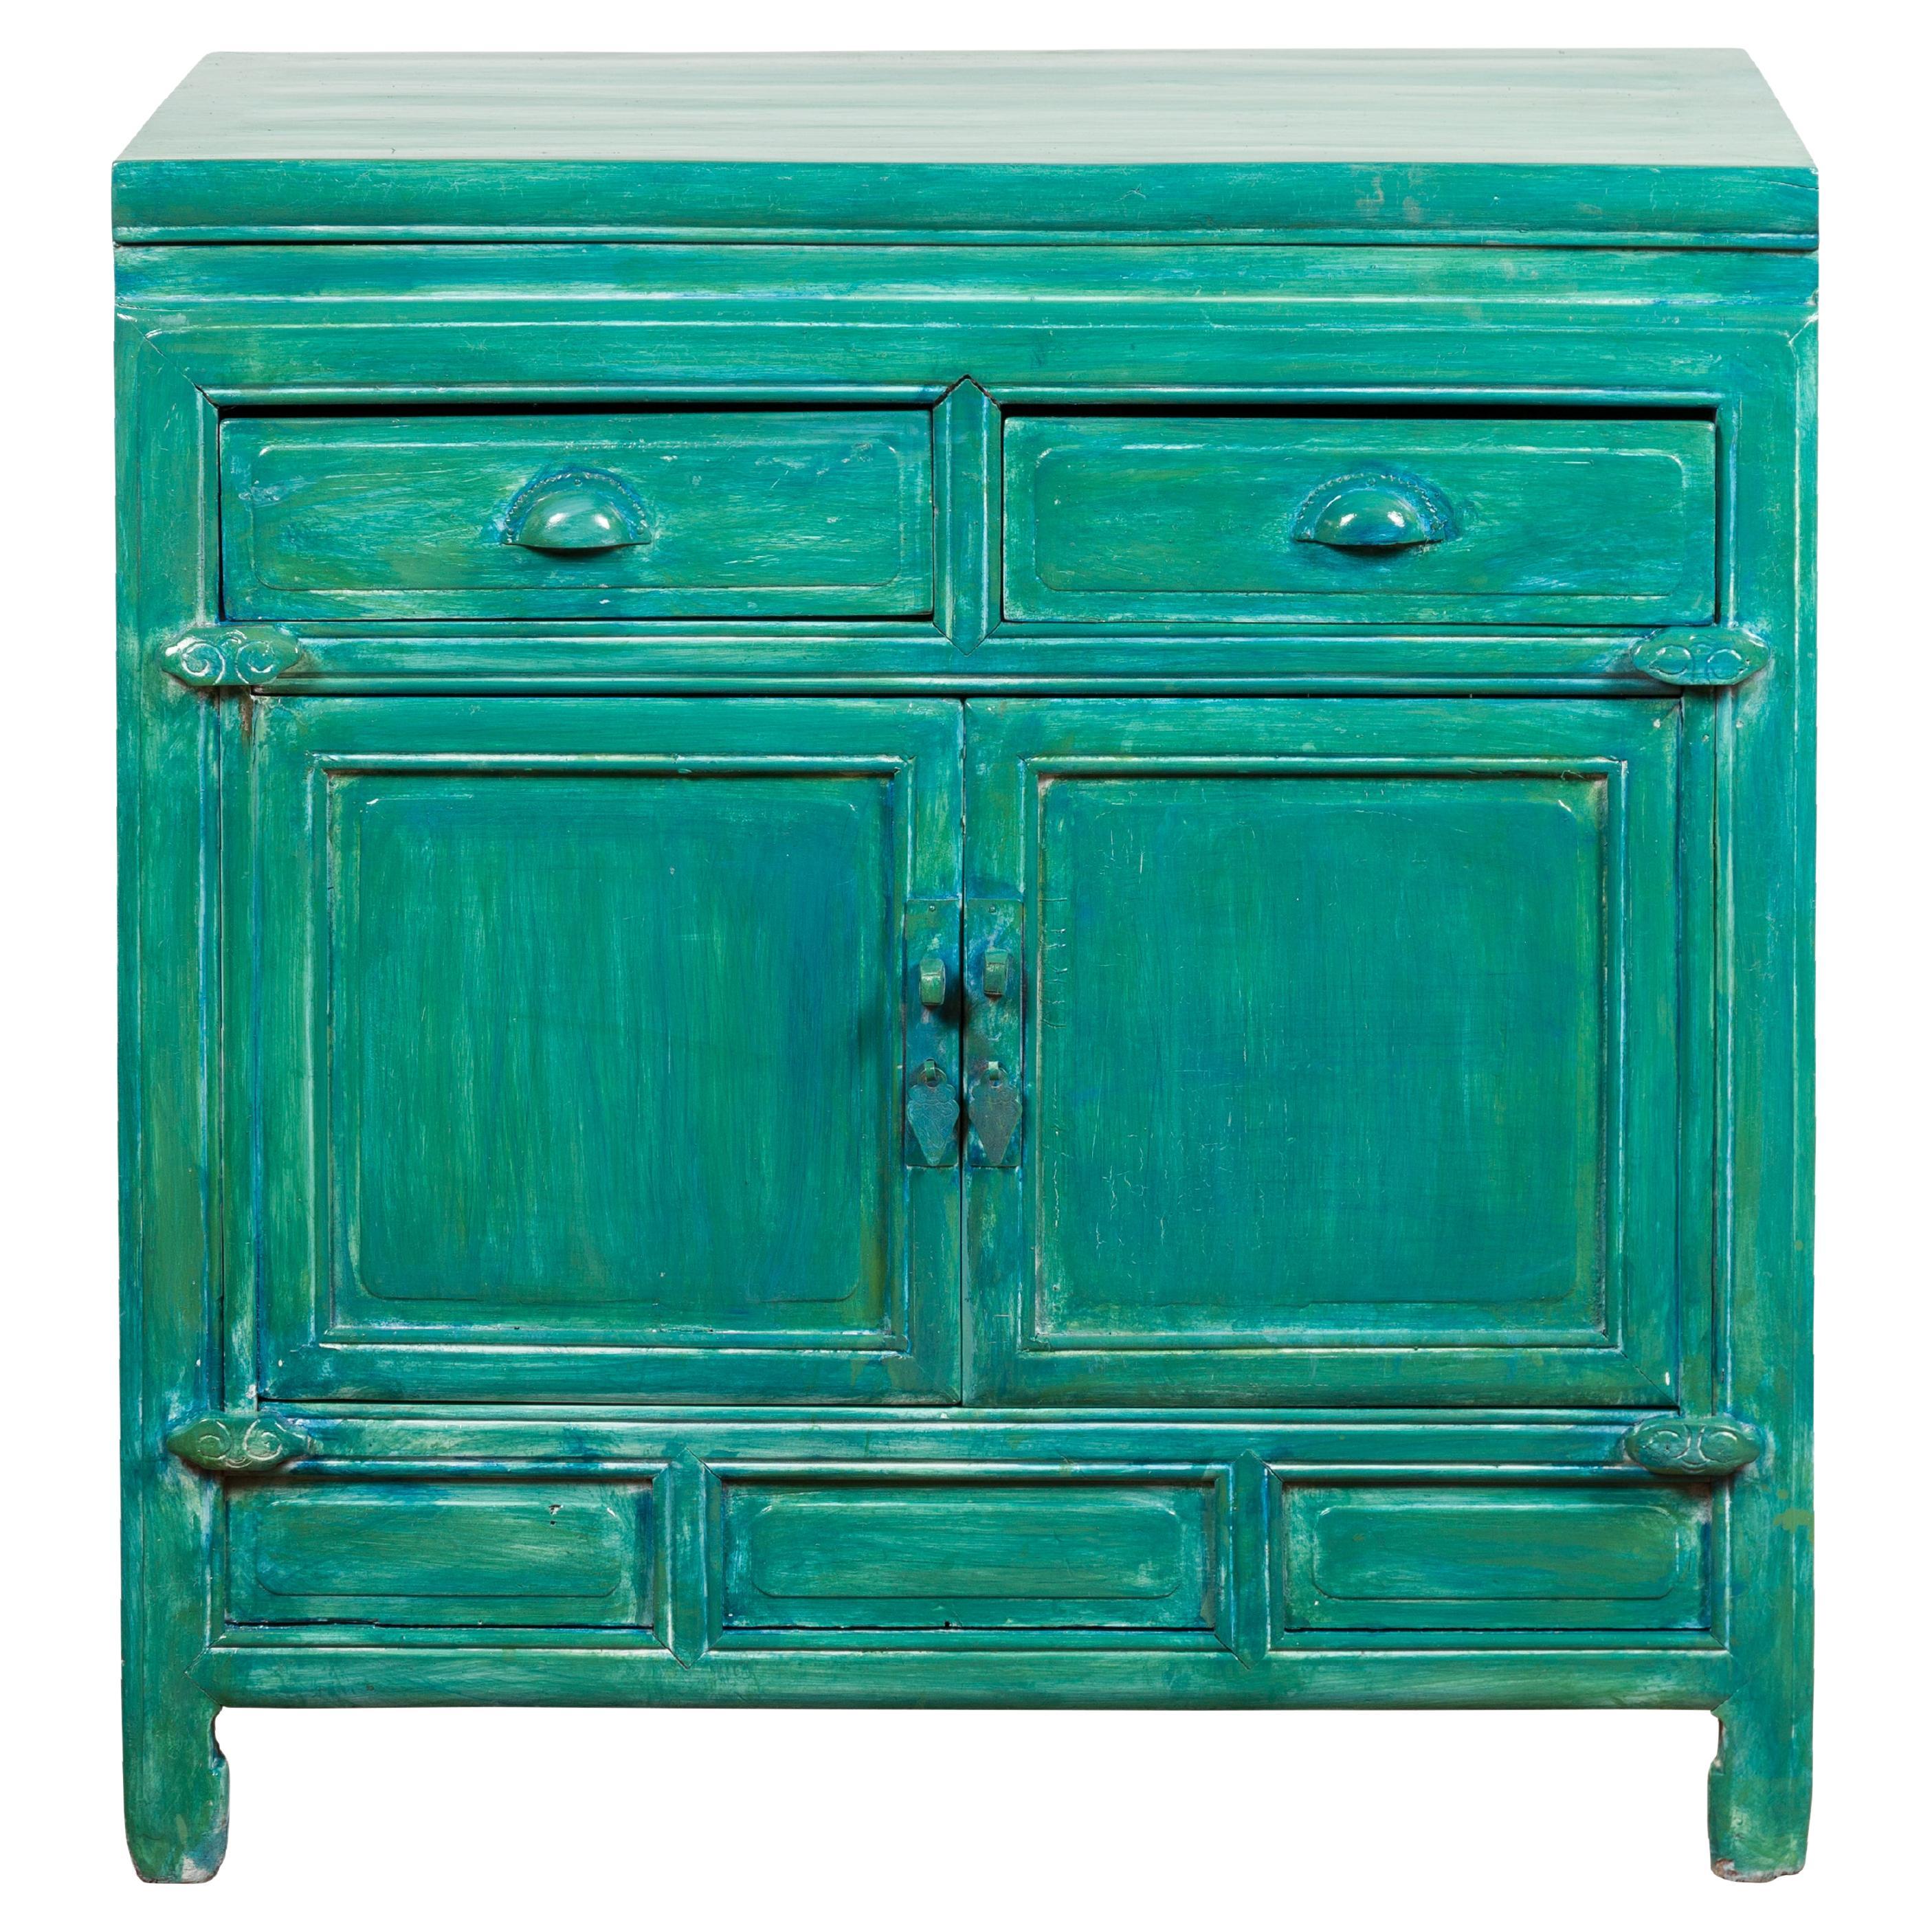 Qing Dynasty Aqua Teal Side Cabinet with Drawers & Doors